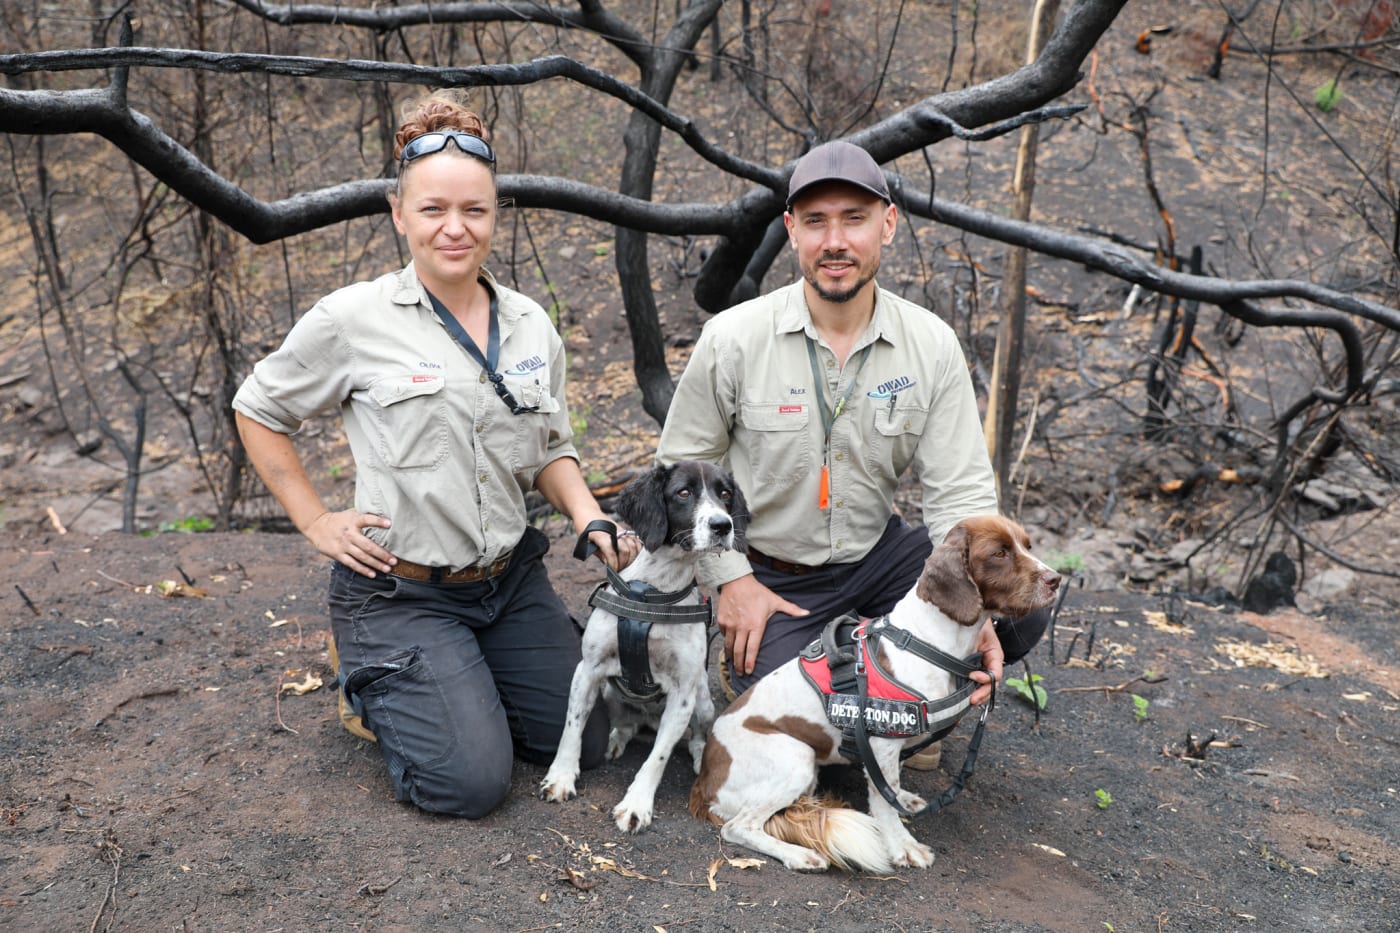 Olivia and Alex from OWAD Environment with detection dogs Missy, right and Taz, left